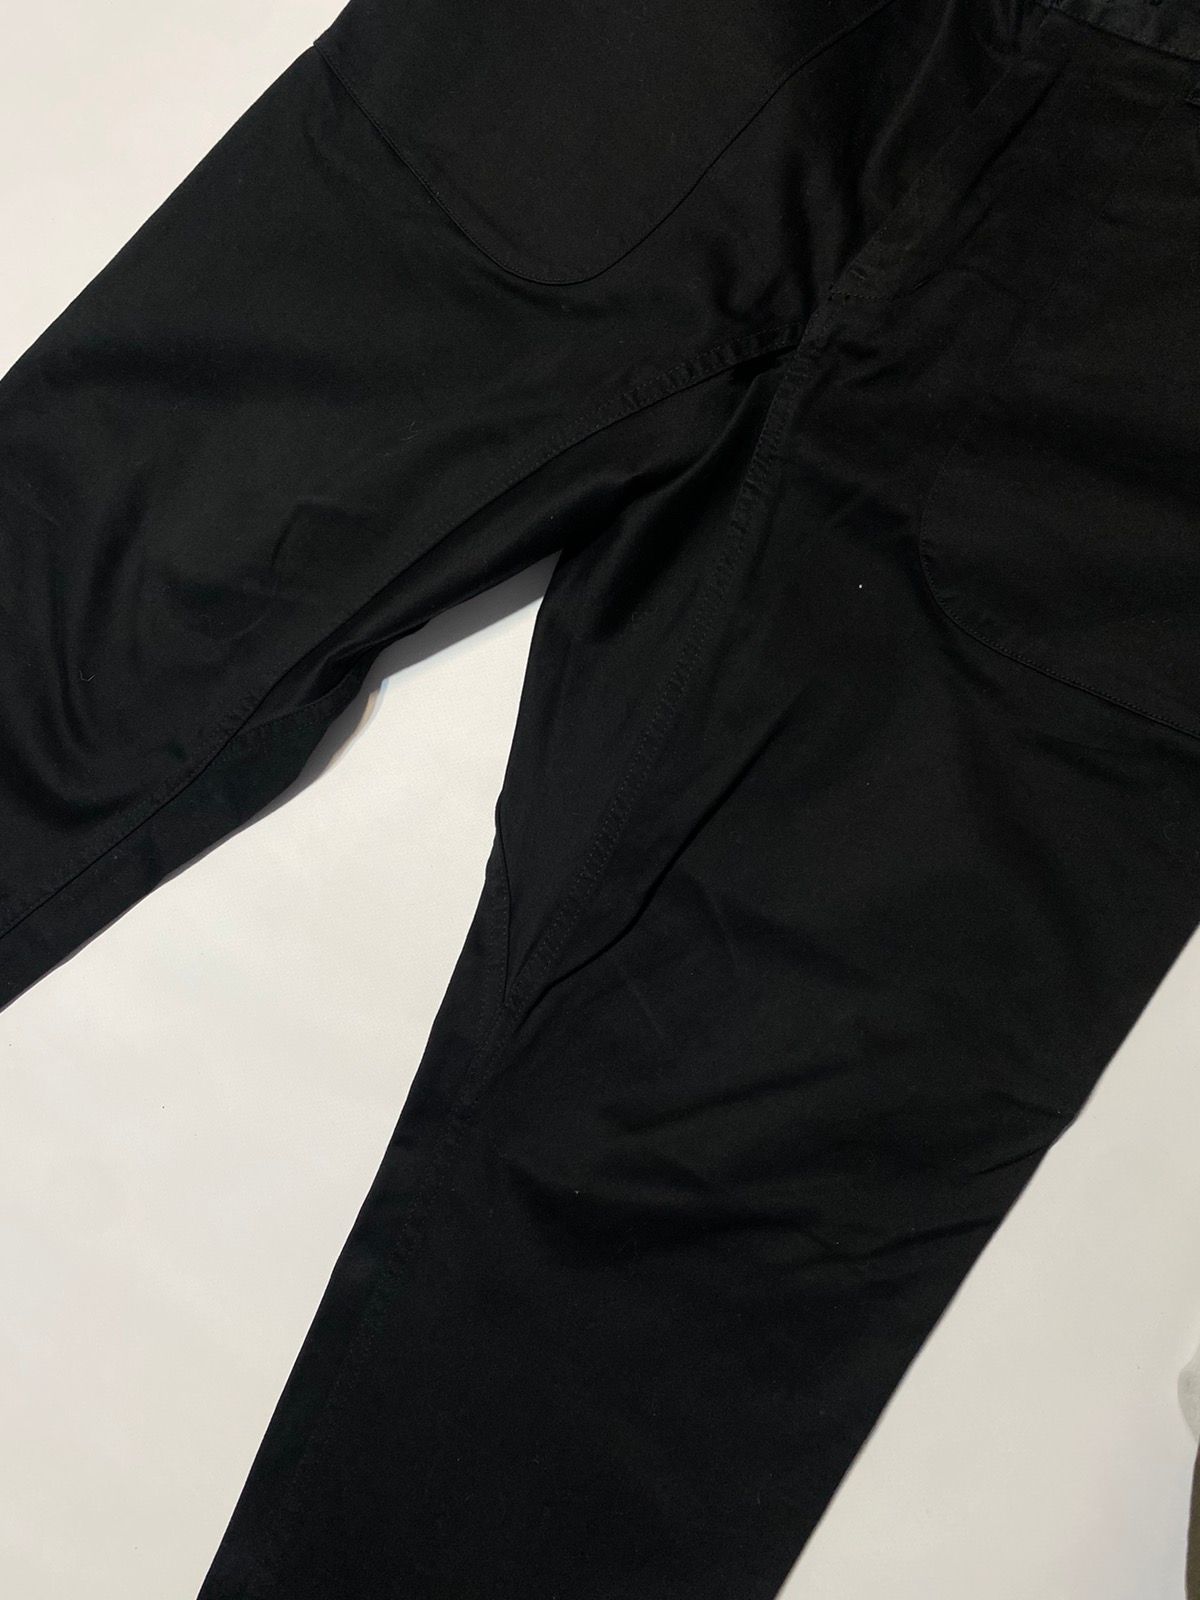 White Mountaineering MADE IN JAPAN White Moutaineering Casual Black Pants Size US 34 / EU 50 - 9 Thumbnail